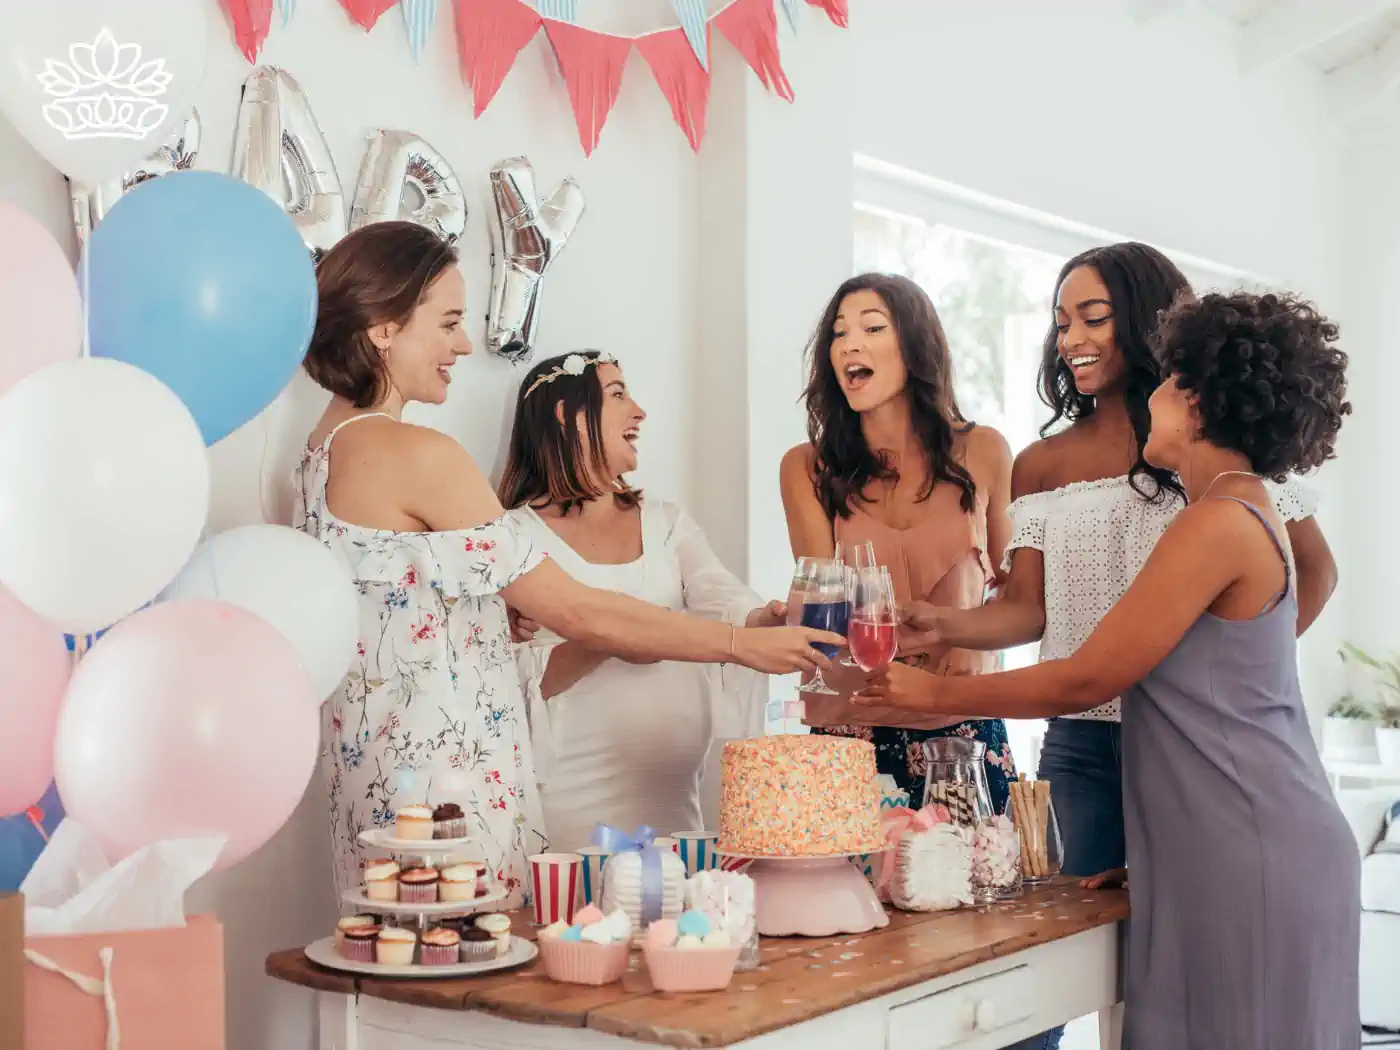 Friends Celebrating at a Baby Shower with Gift Boxes, Balloons, and Decorations - Fabulous Flowers and Gifts Collection.